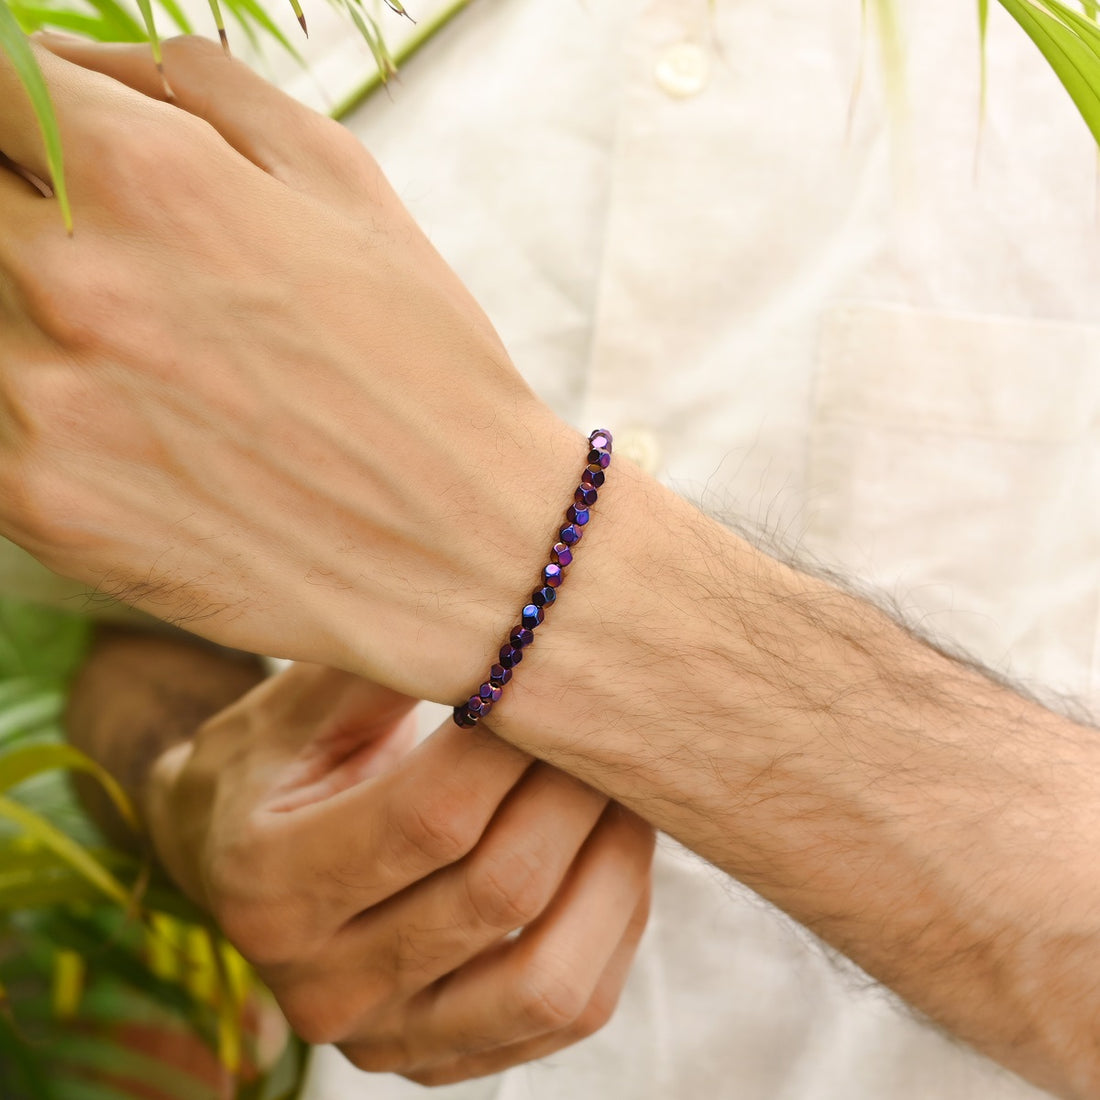 Ethereal Purple Hematite Star Cut Stretch Bracelet: Smooth 4mm star cut beads in captivating purple hue